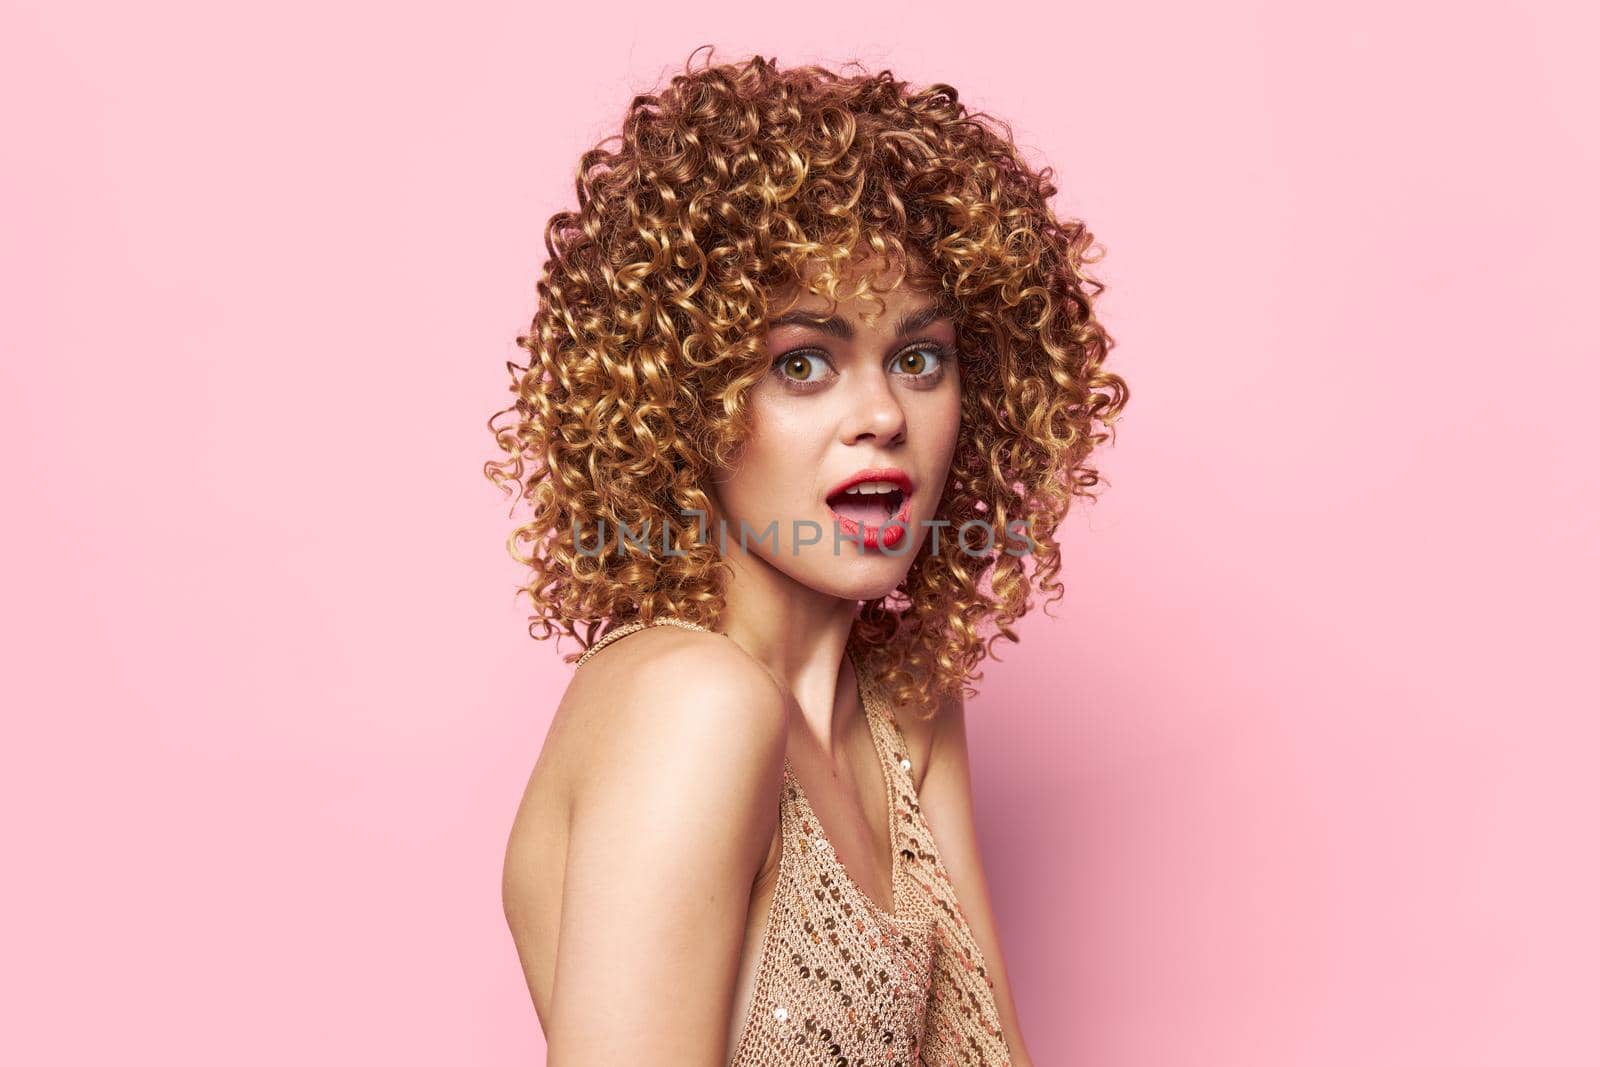 Female Curly hair surprised look pink background portrait bright makeup by SHOTPRIME